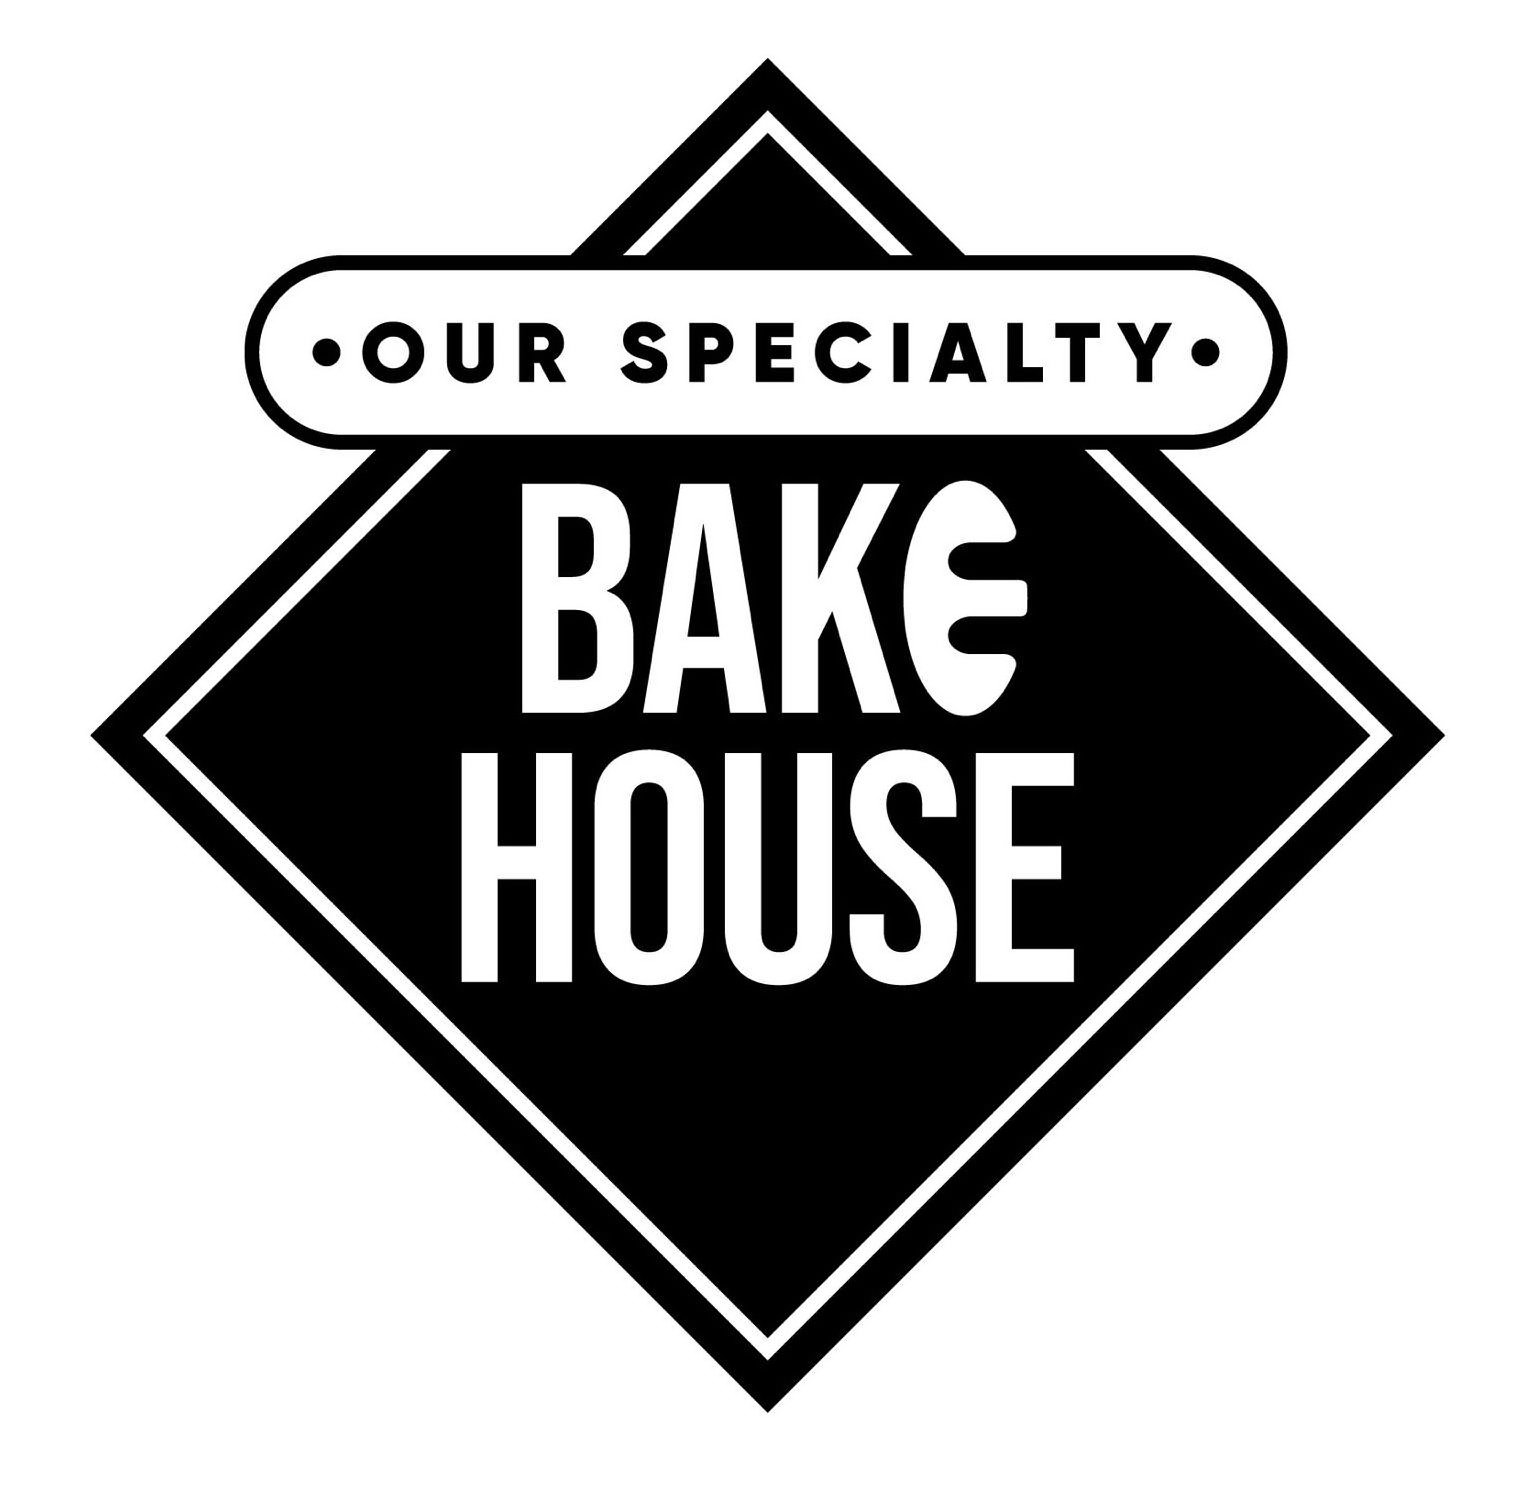  OUR SPECIALTY BAKE HOUSE